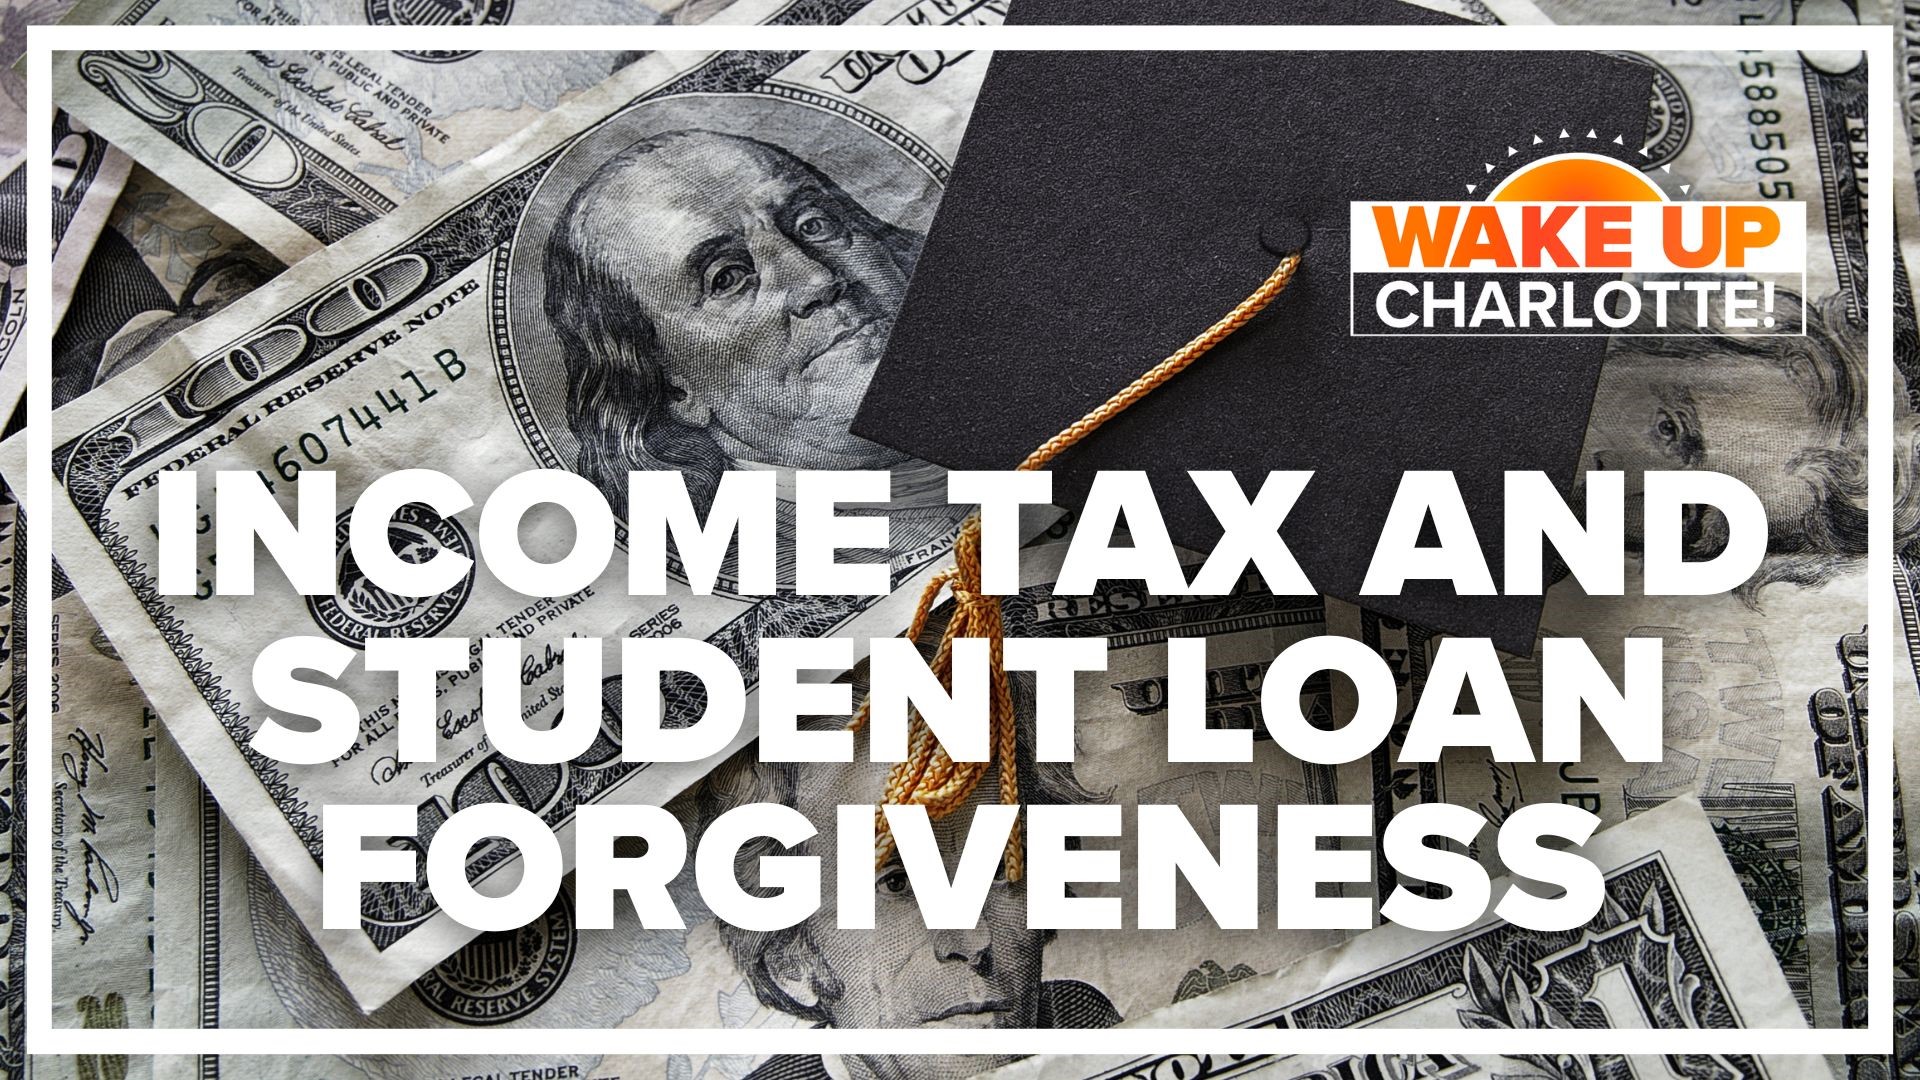 North Carolina Gov. Roy Cooper is calling on state lawmakers to create new efforts to eliminate state income taxes on forgiven federal student loans.